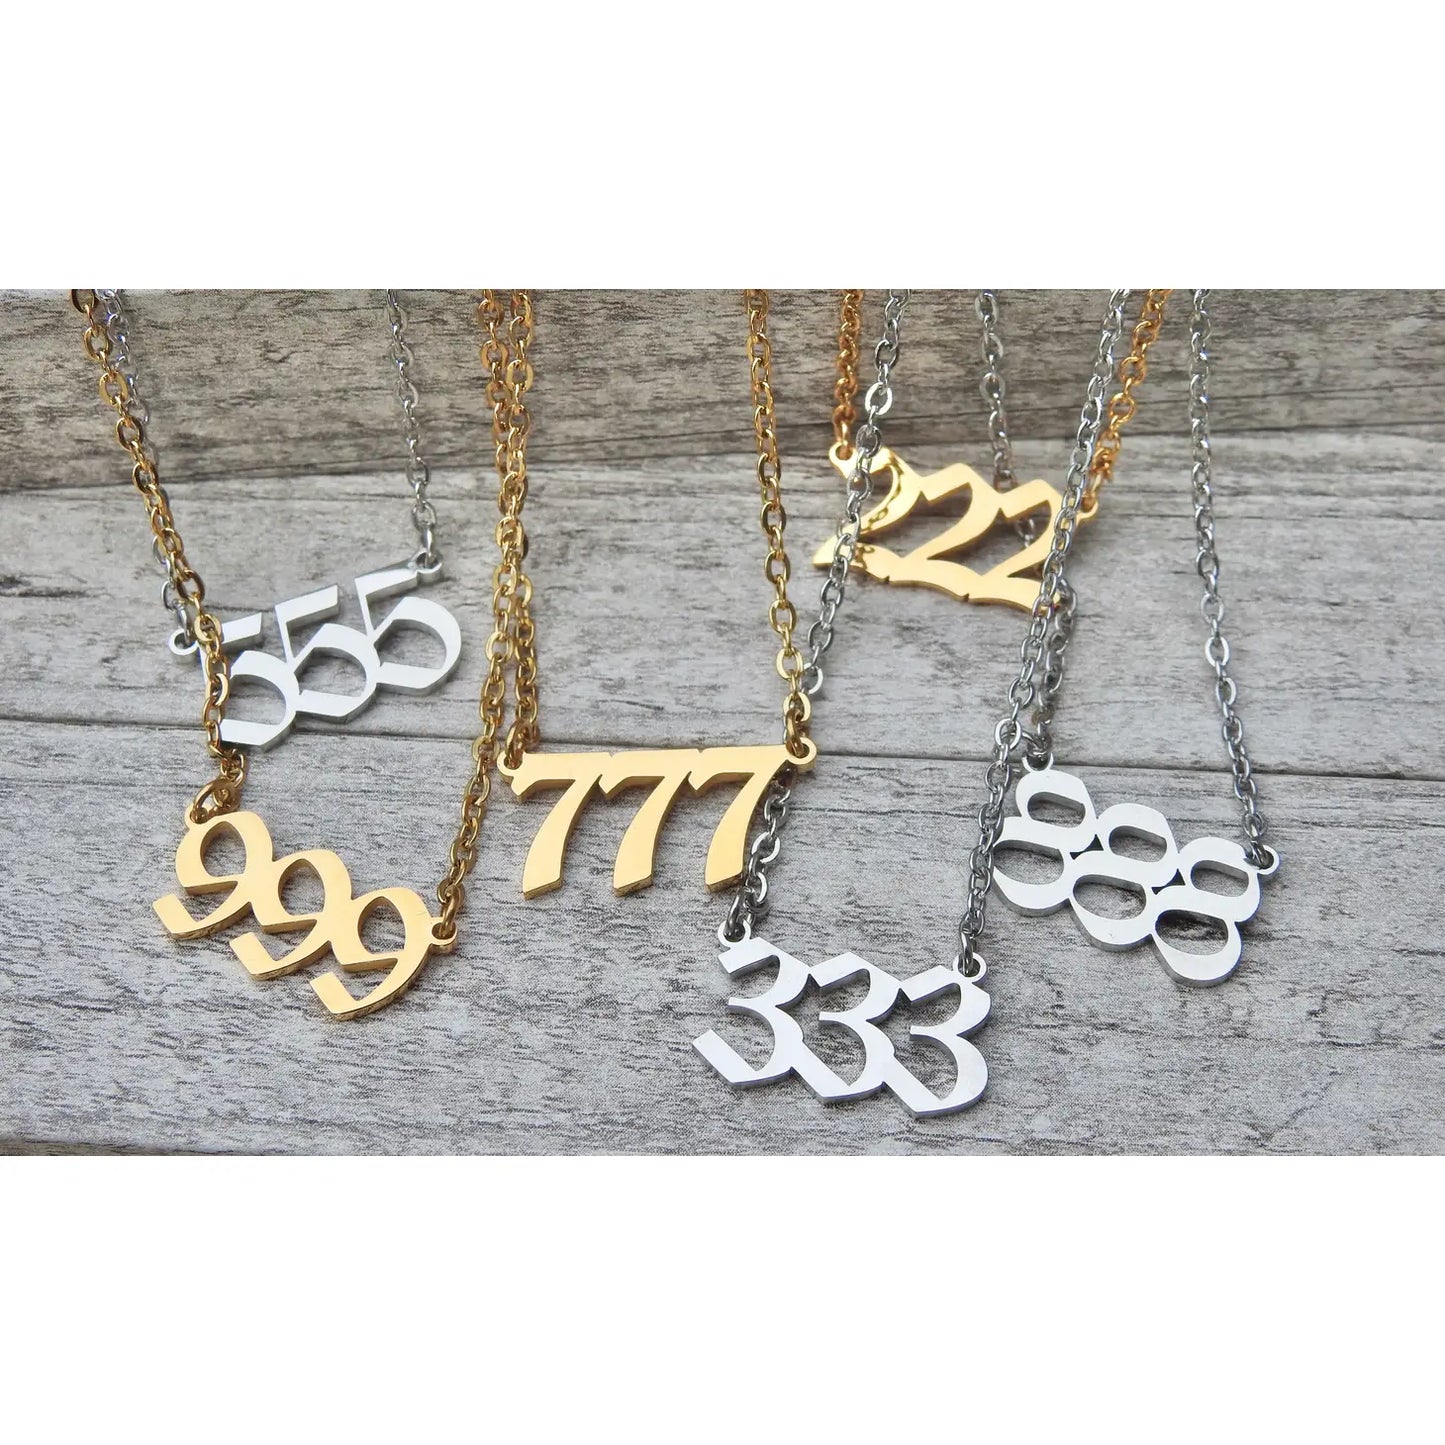 angel number necklaces